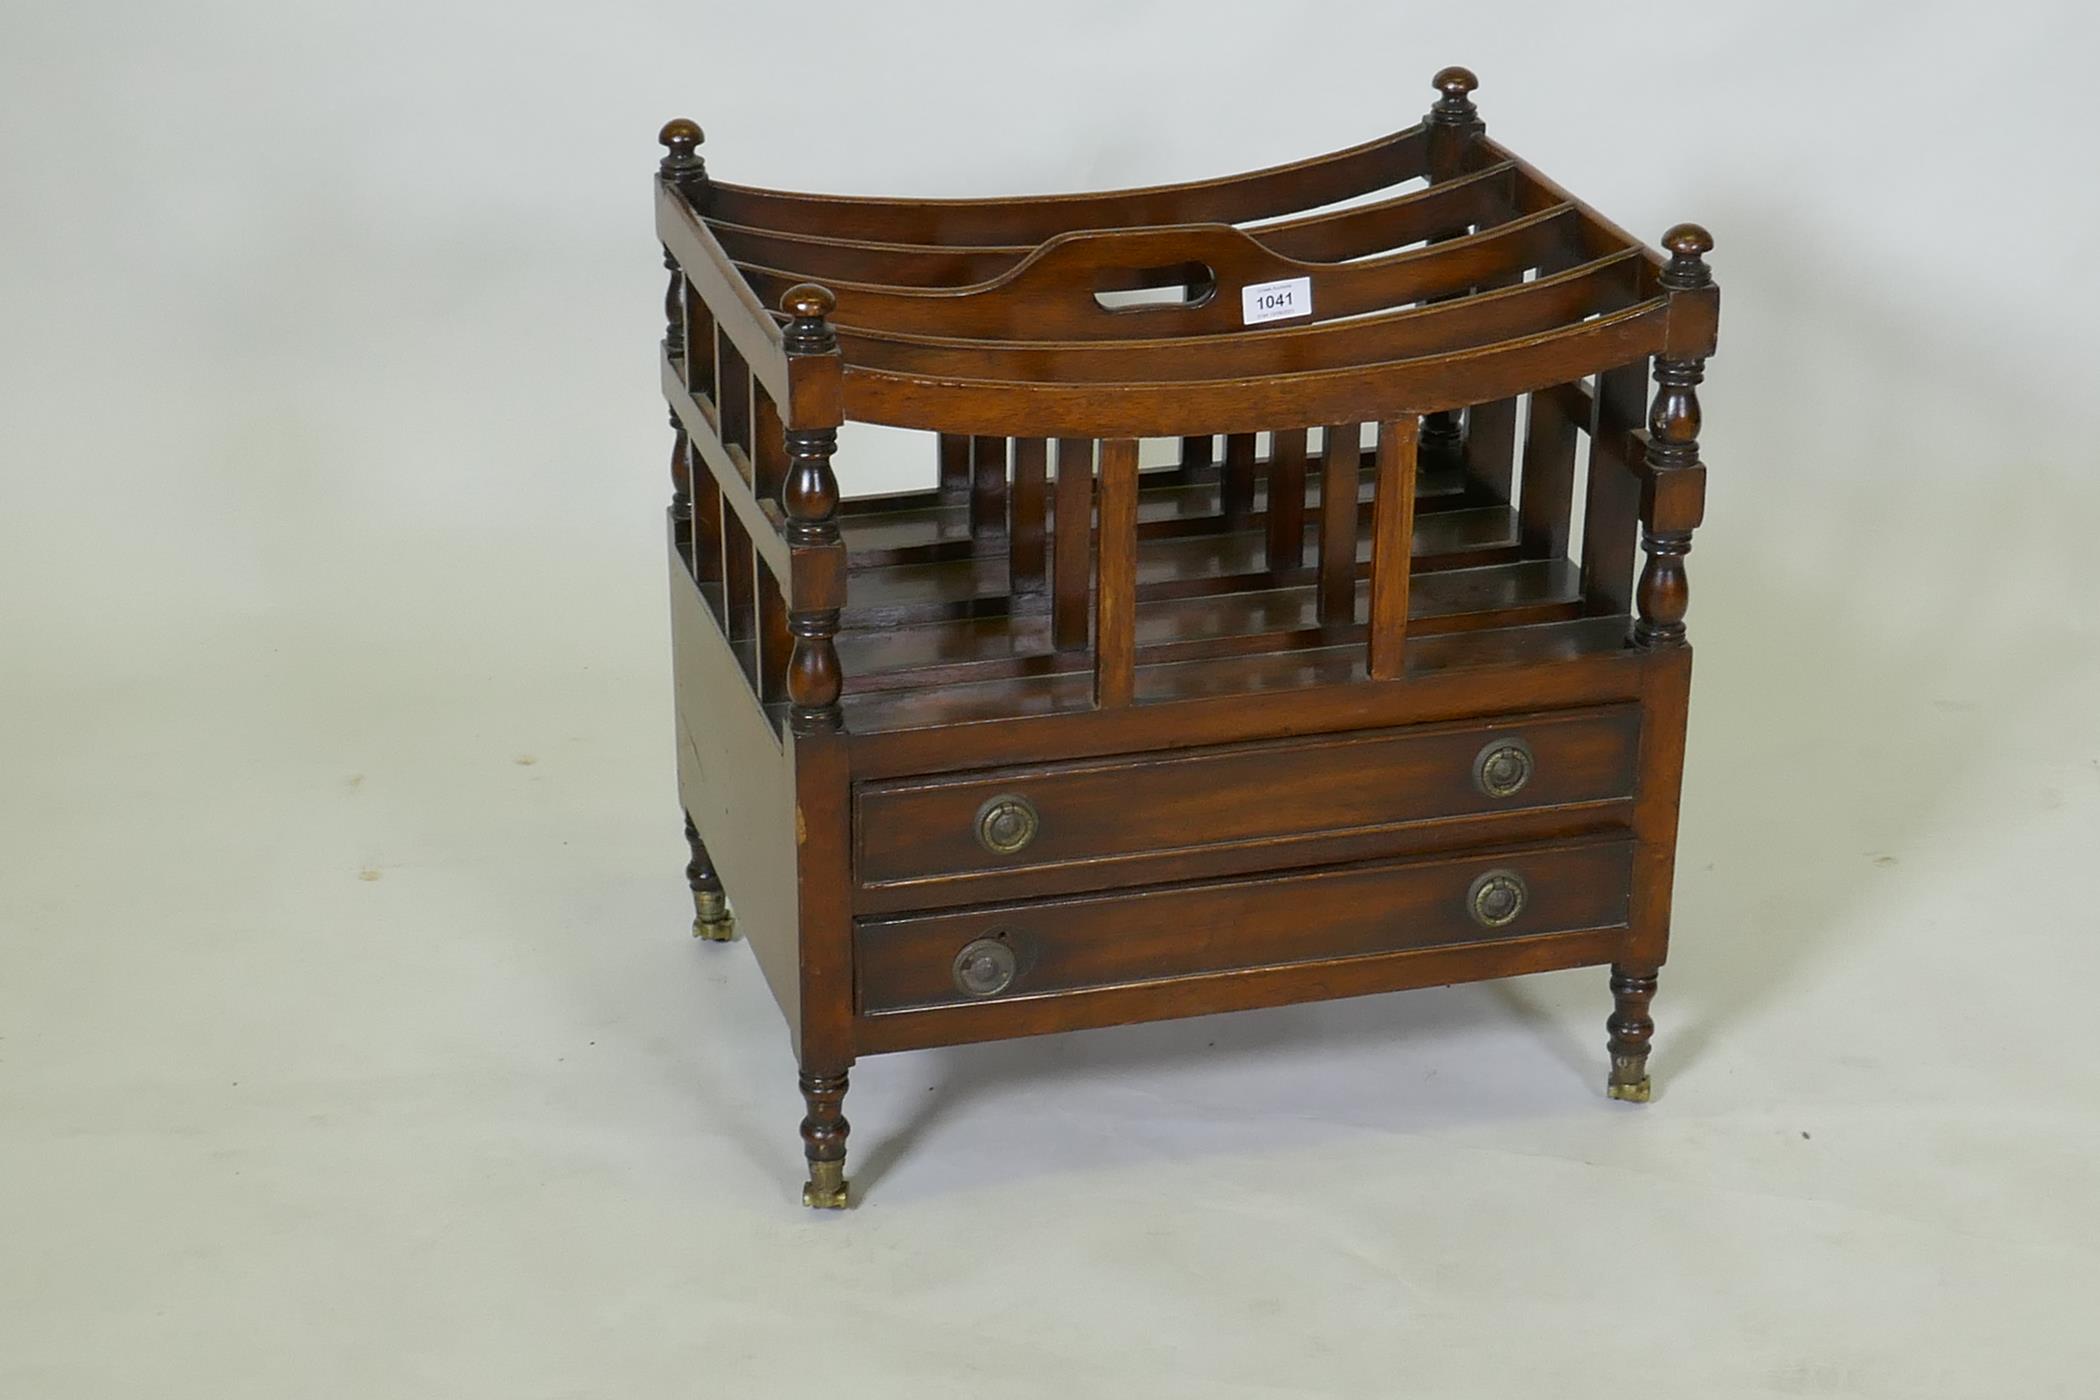 A C19th mahogany canterbury with two drawers, raised on turned supports with brass castors, 49 x